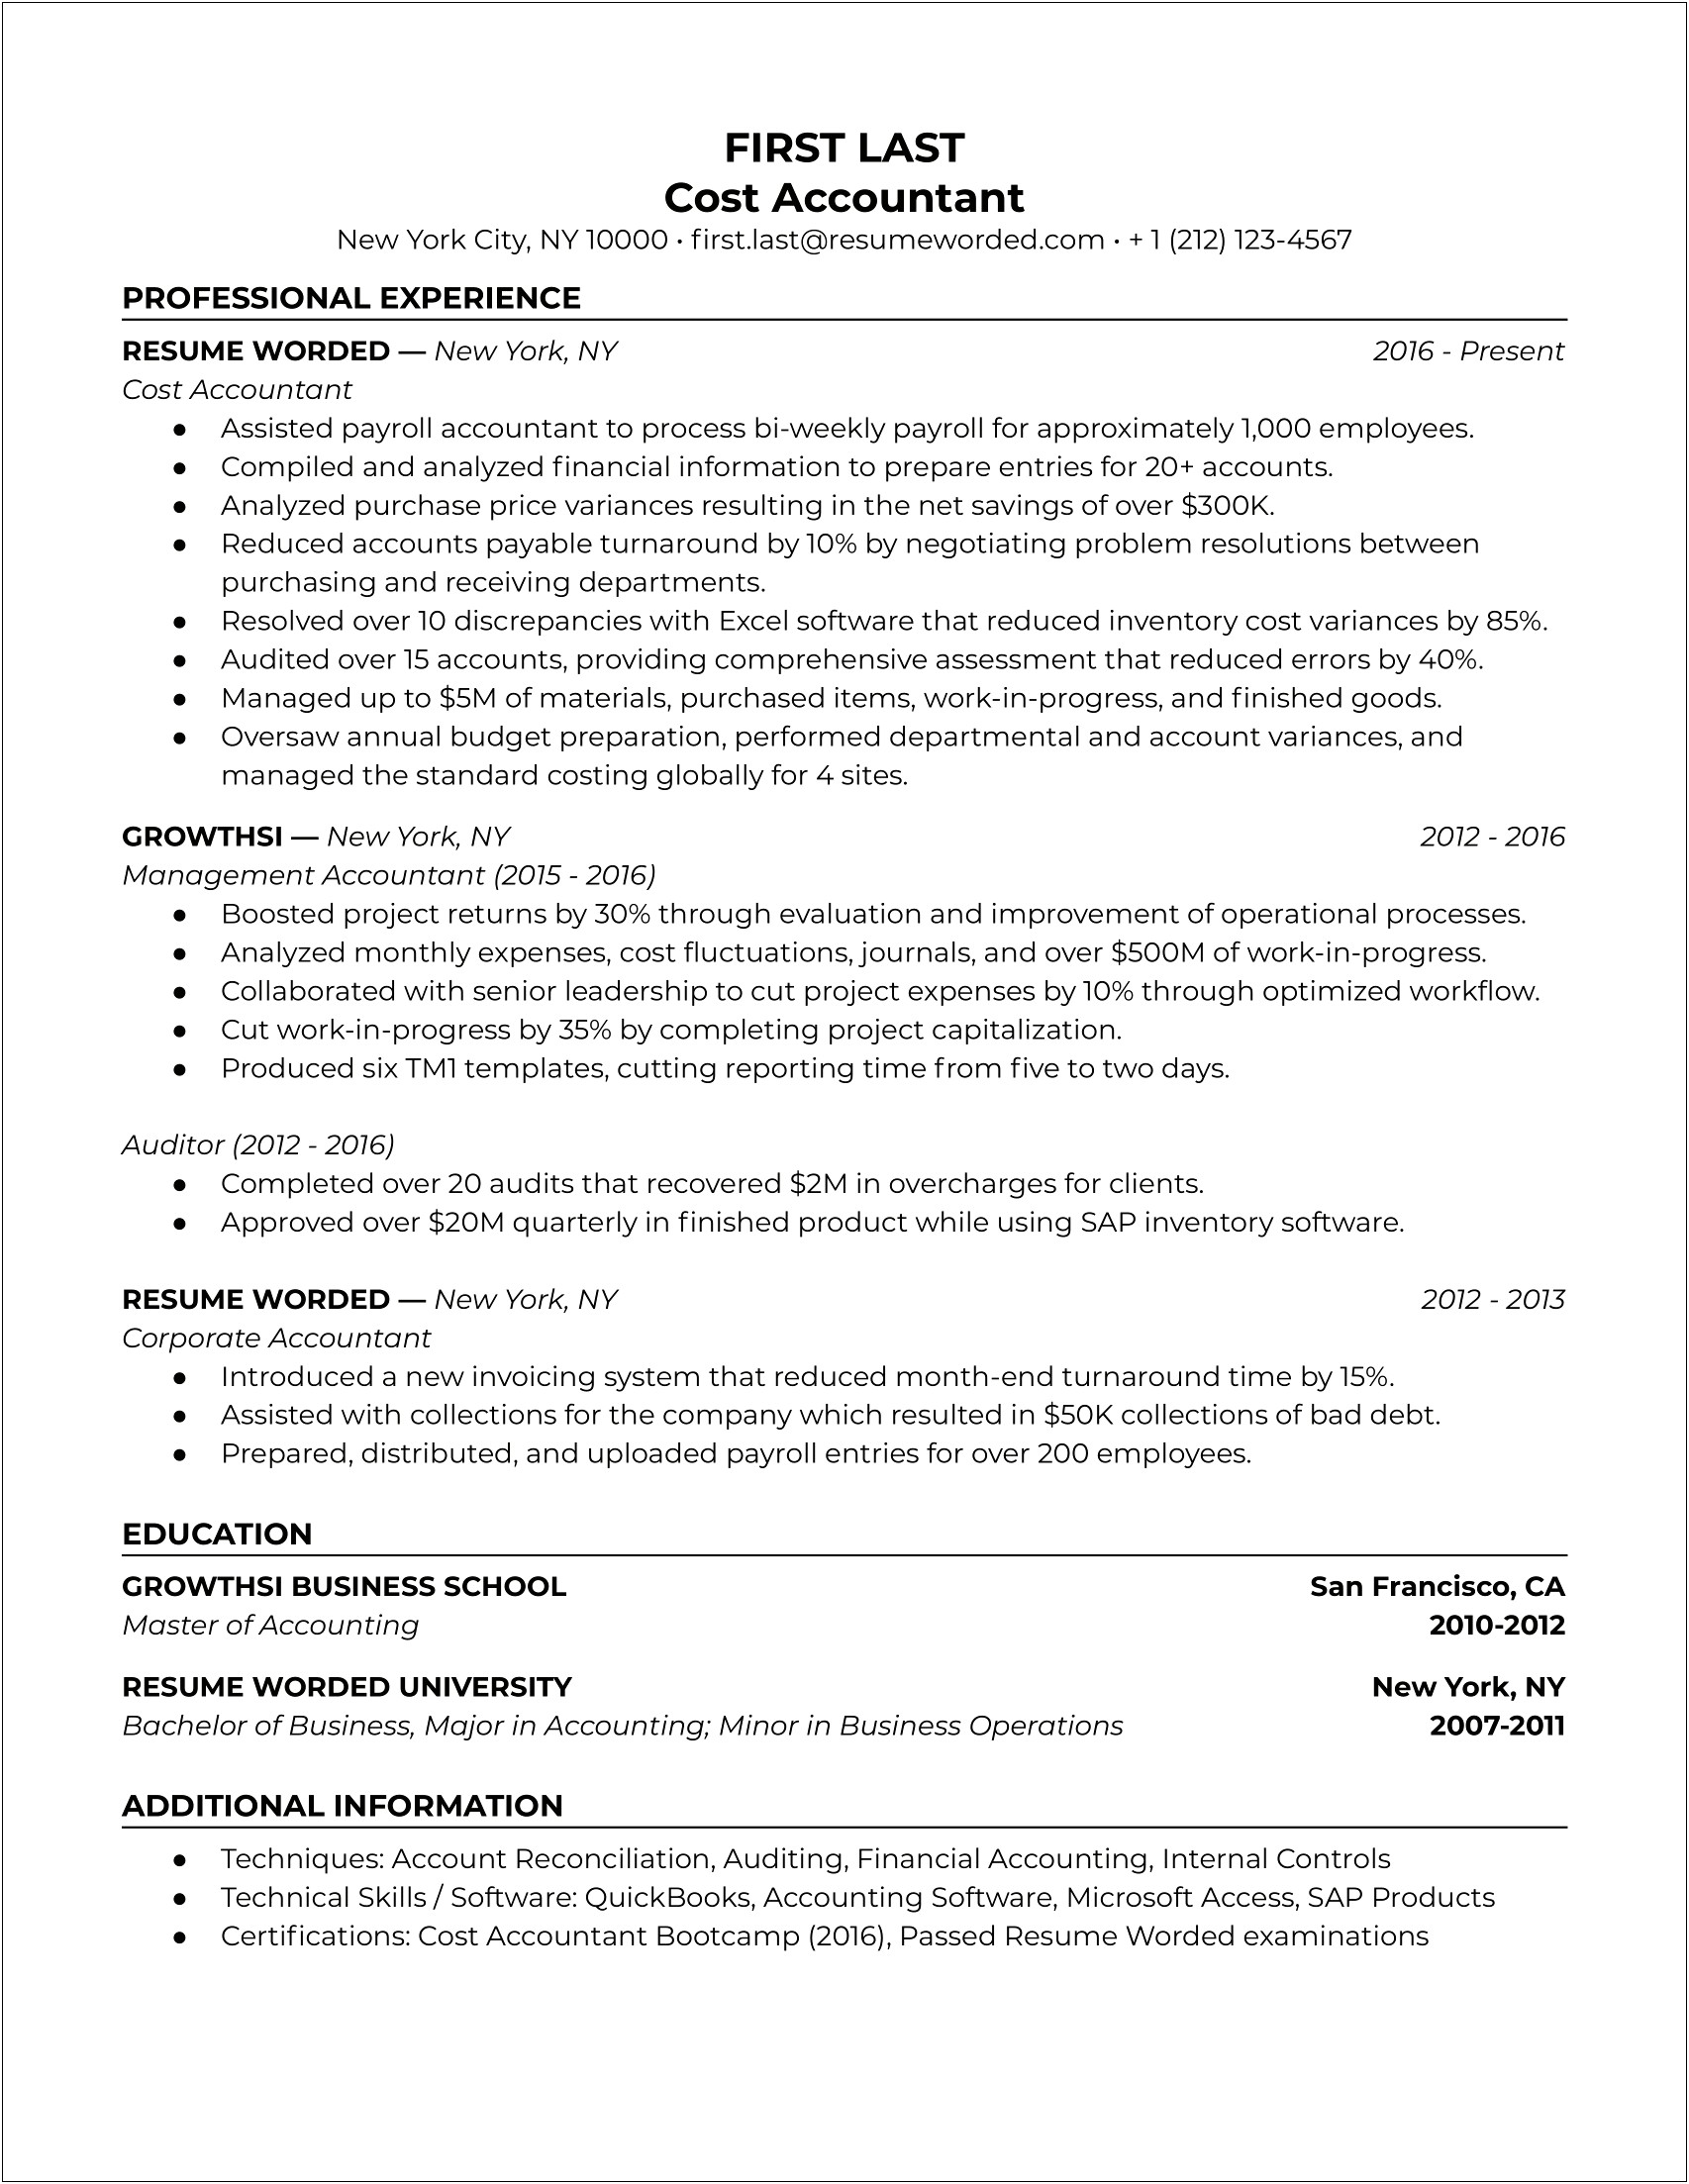 Resume Examples For Finance And Accounting Majors